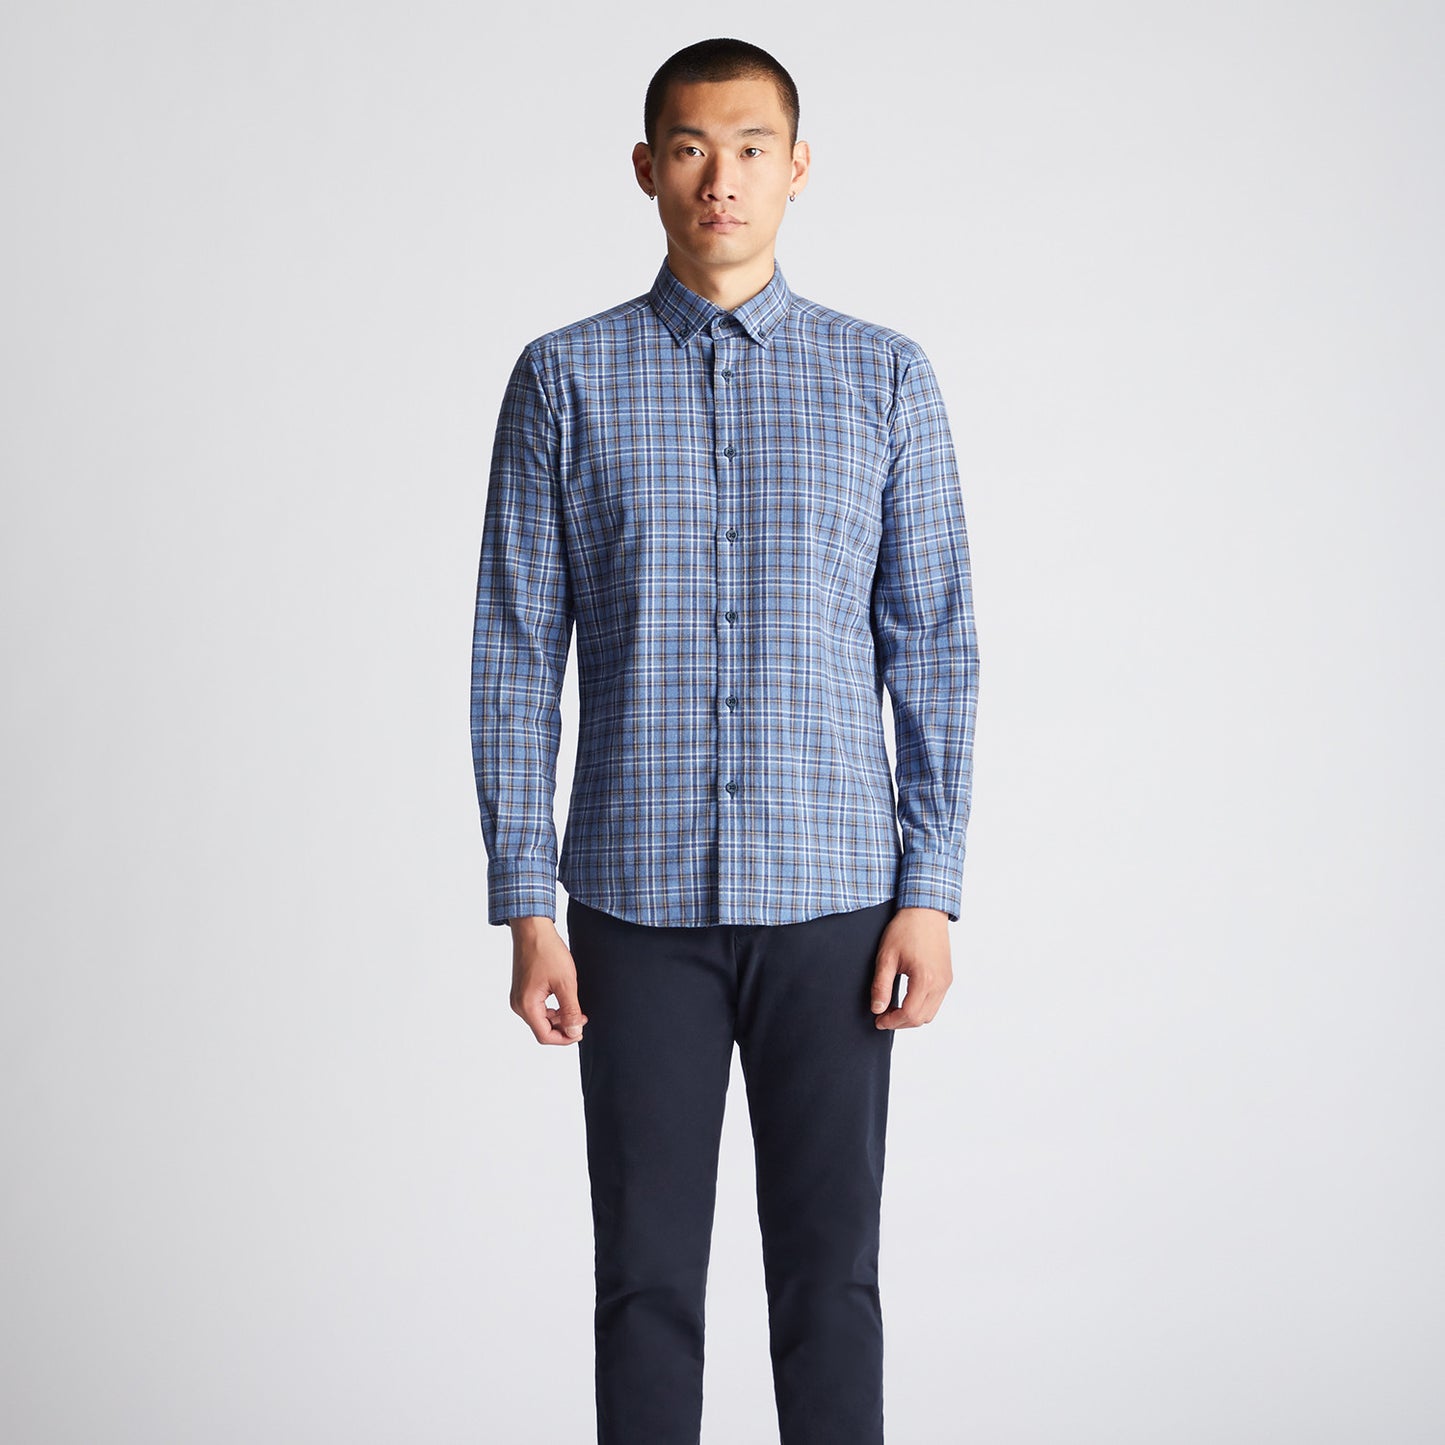 Remus Uomo 13775 24 Blue Tapered Fit Seville Casual Shirt